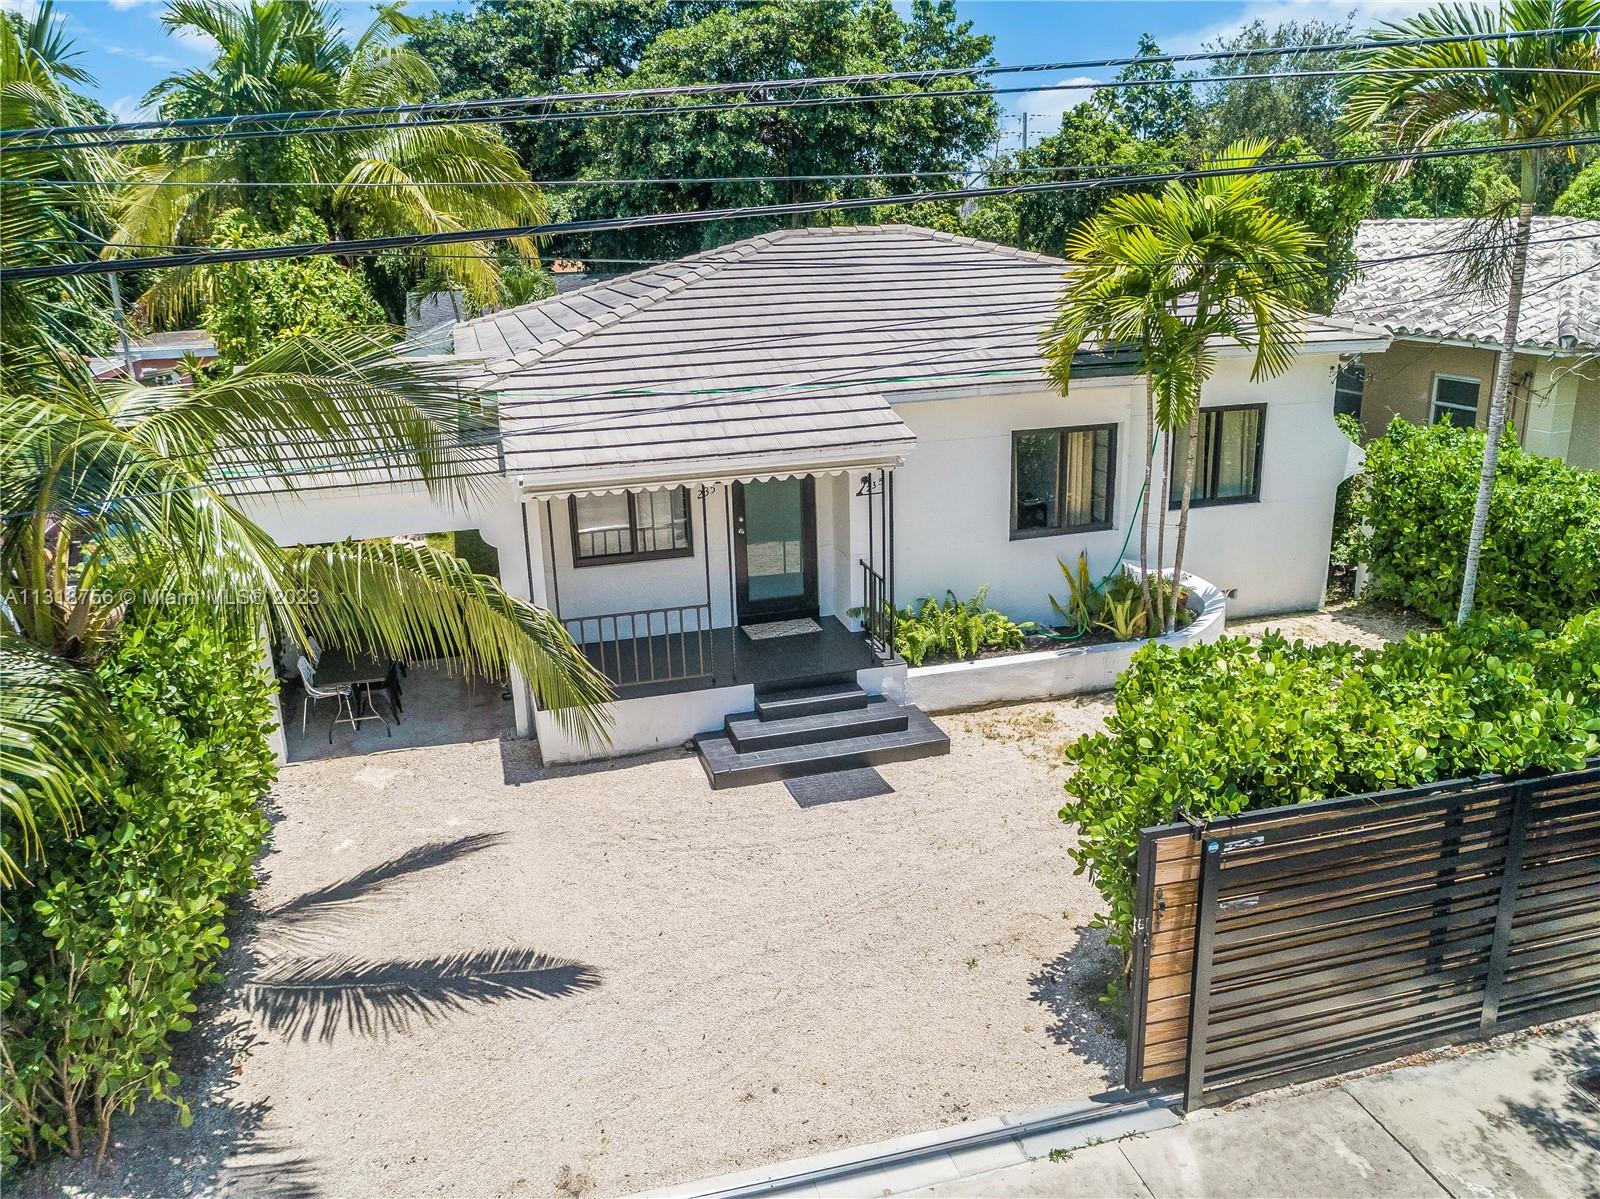 235 Nw 50th St St, Miami, Broward County, Florida - 6 Bedrooms  
3 Bathrooms - 